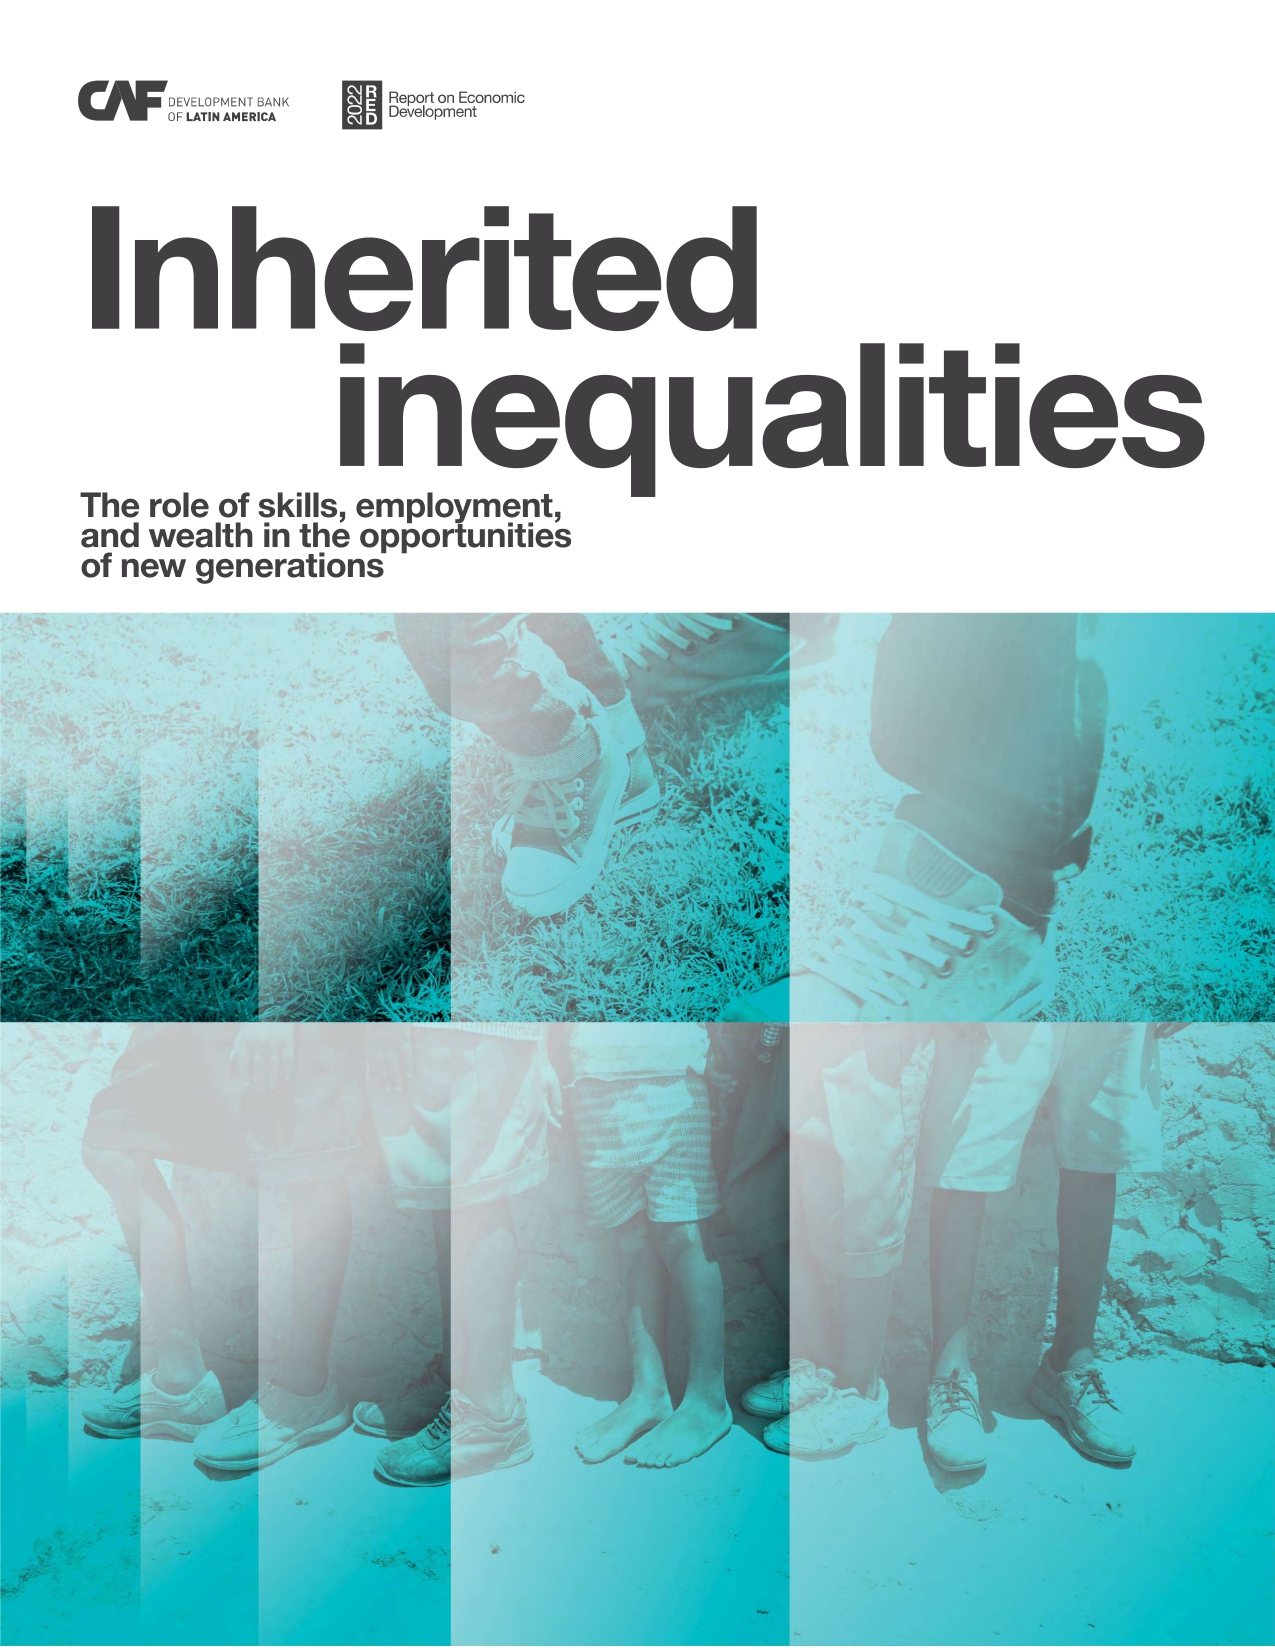 Inherited inequalities: The role of skills, employment, and wealth  in the opportunities of new generations